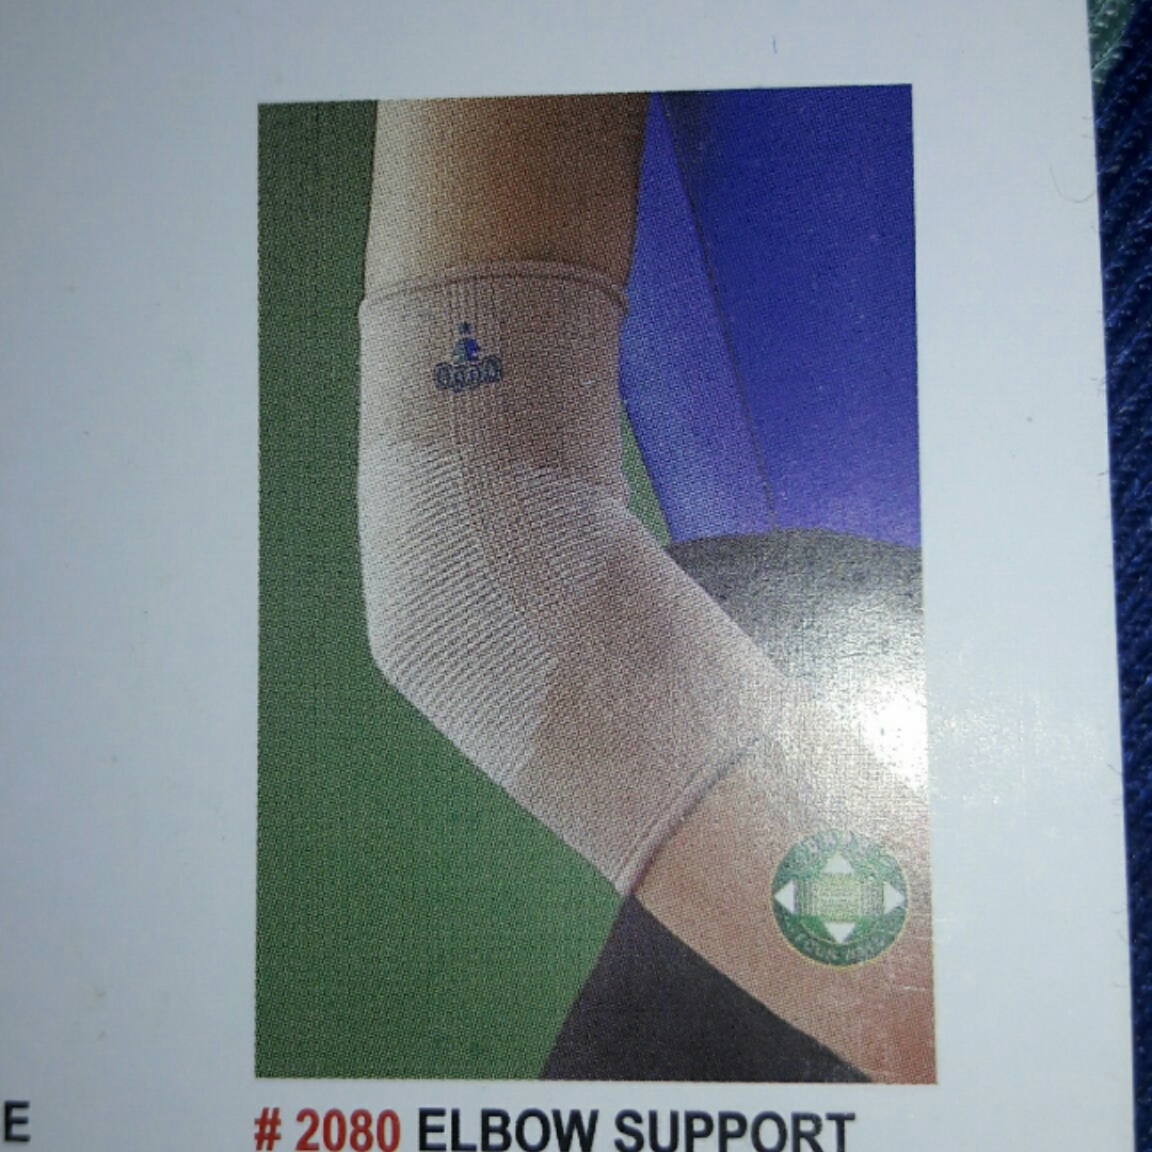 ELBOW SUPPORT OPPO 2080